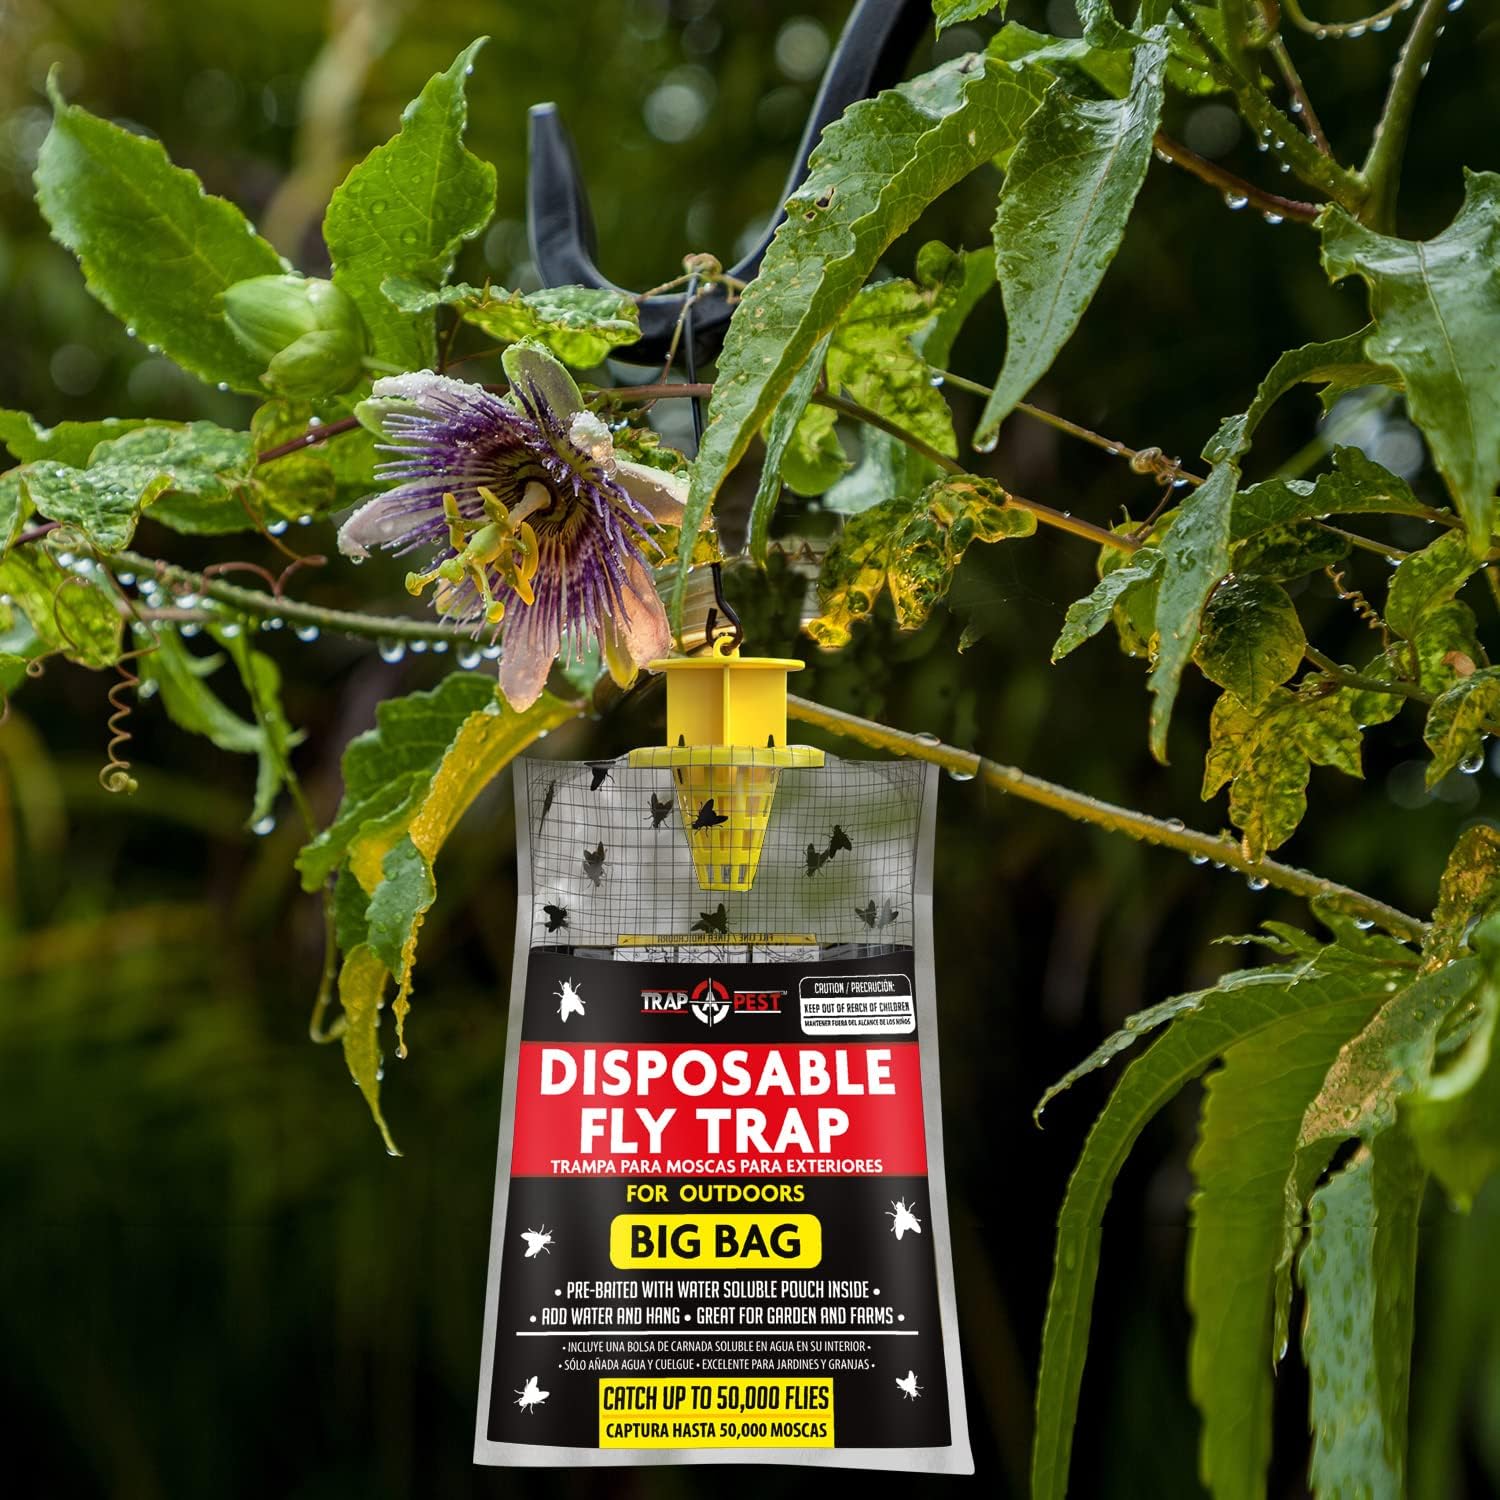 Fly Bag (16 pack) – Trap a Pest